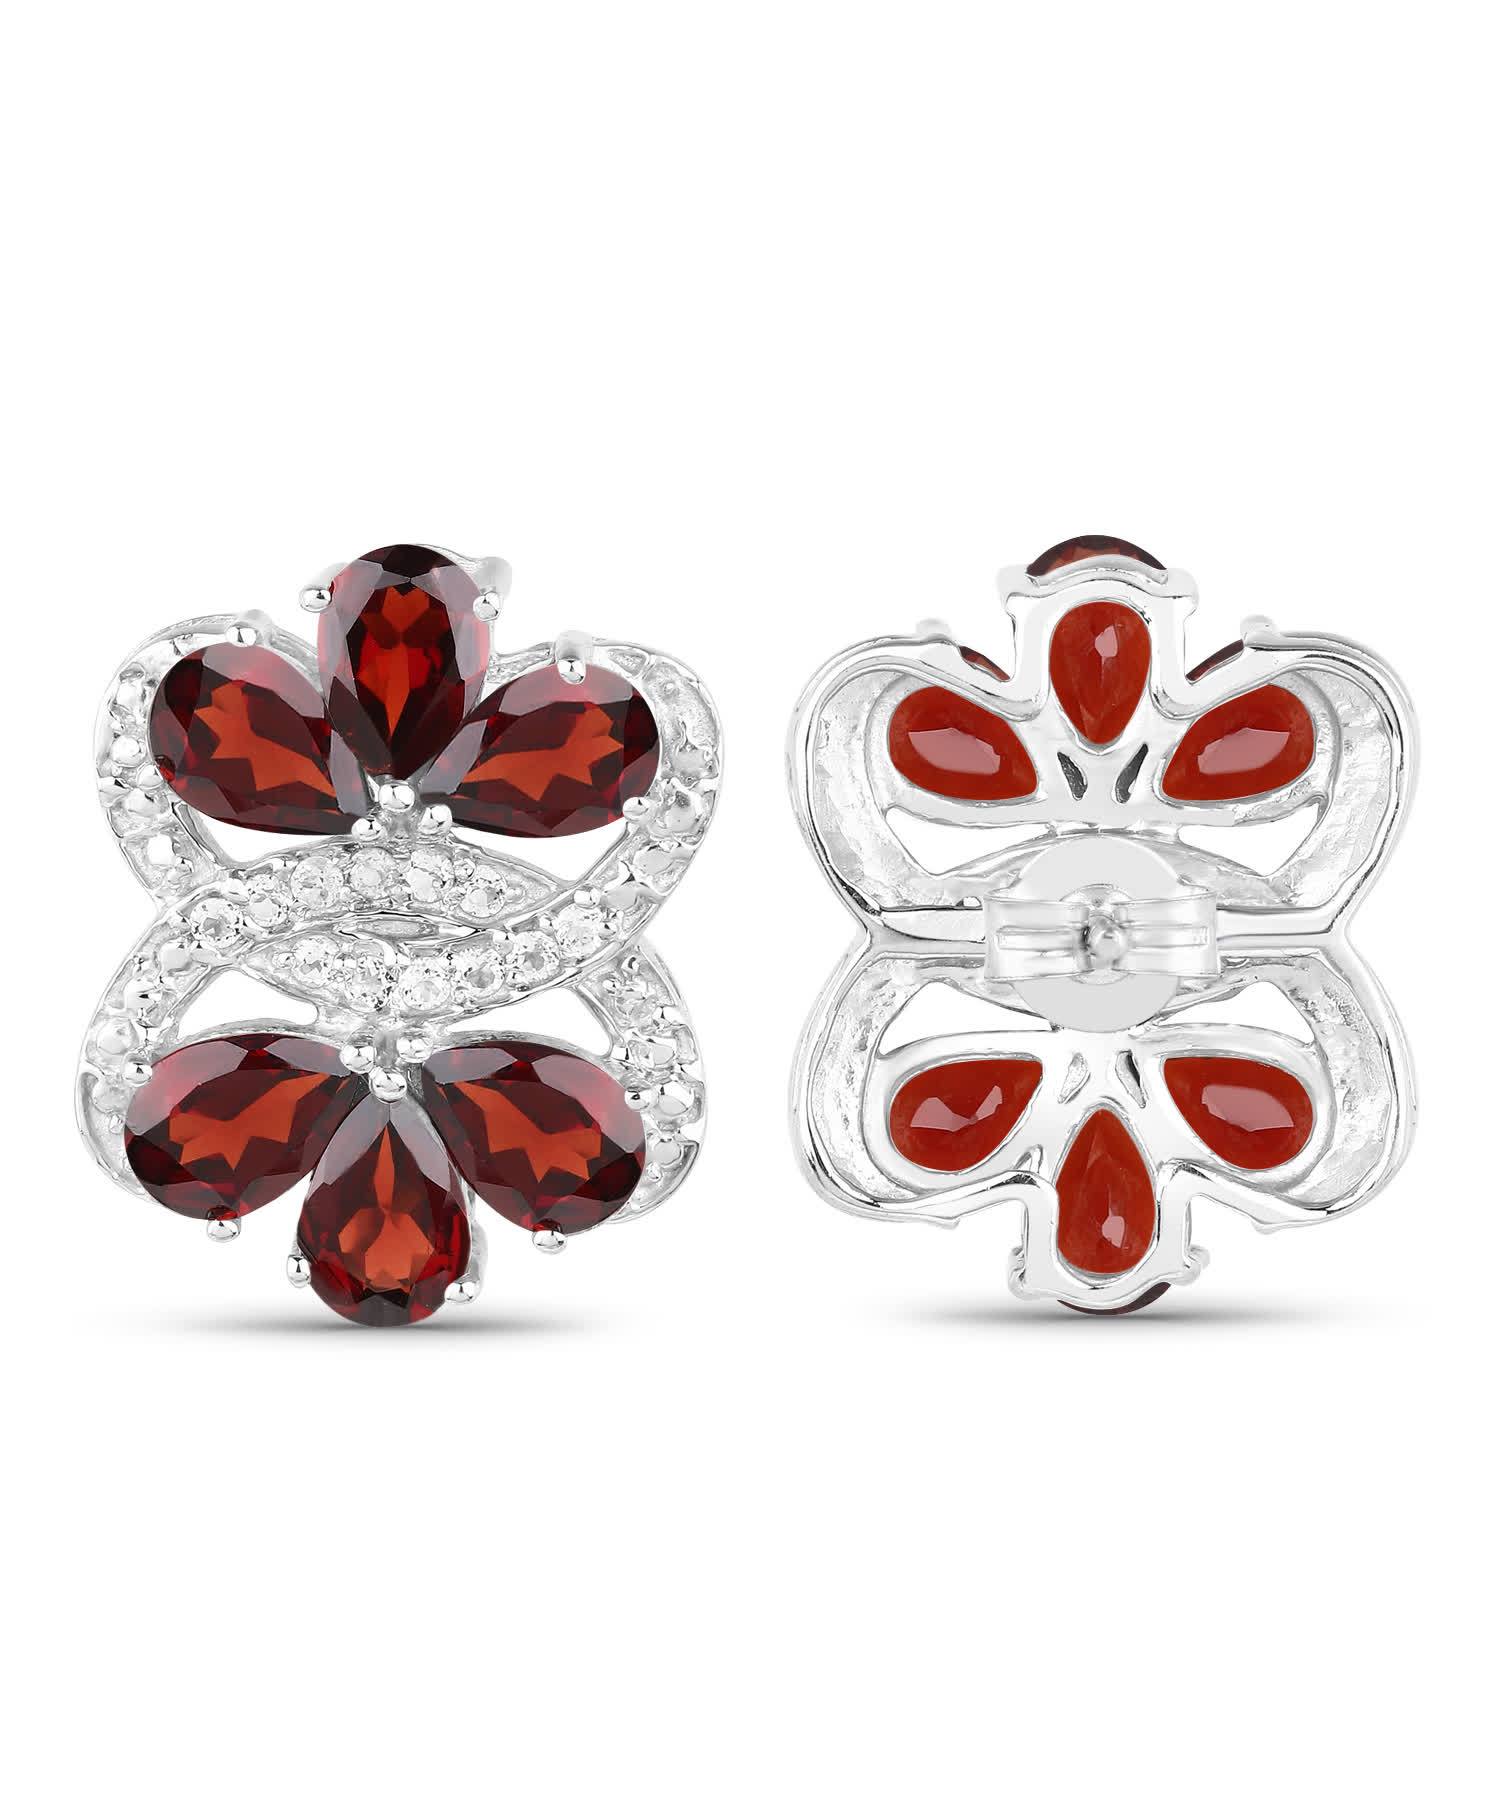 10.38ctw Natural Garnet and White Topaz Rhodium Plated 925 Sterling Silver Fashion Earrings View 3